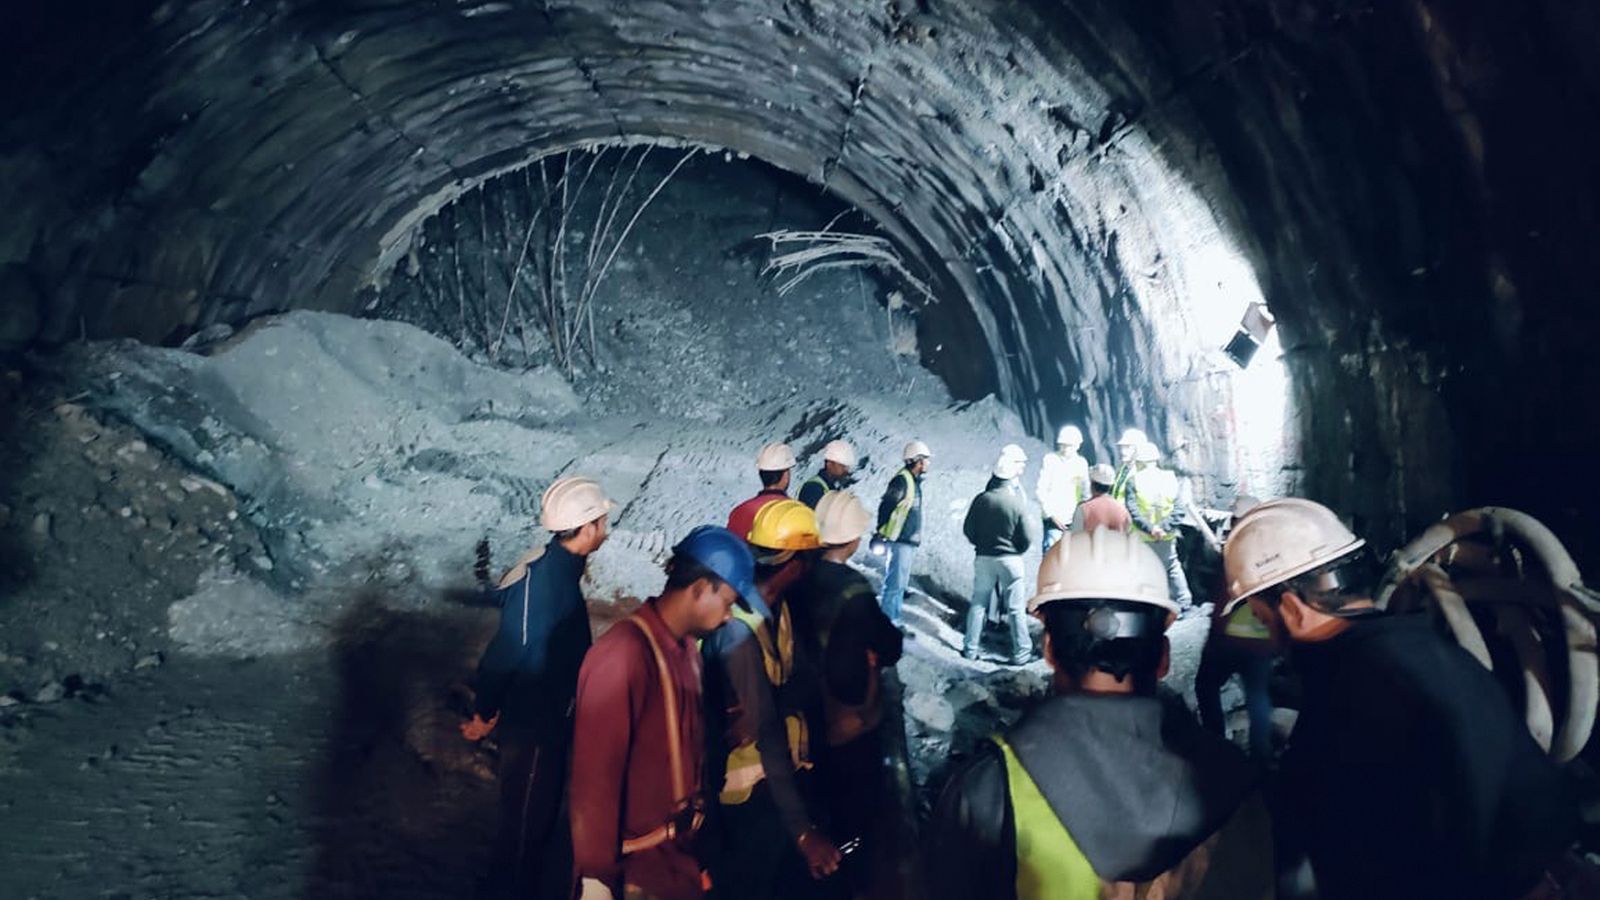 India tunnel collapse: Rescue operation under way to save 40 trapped workers